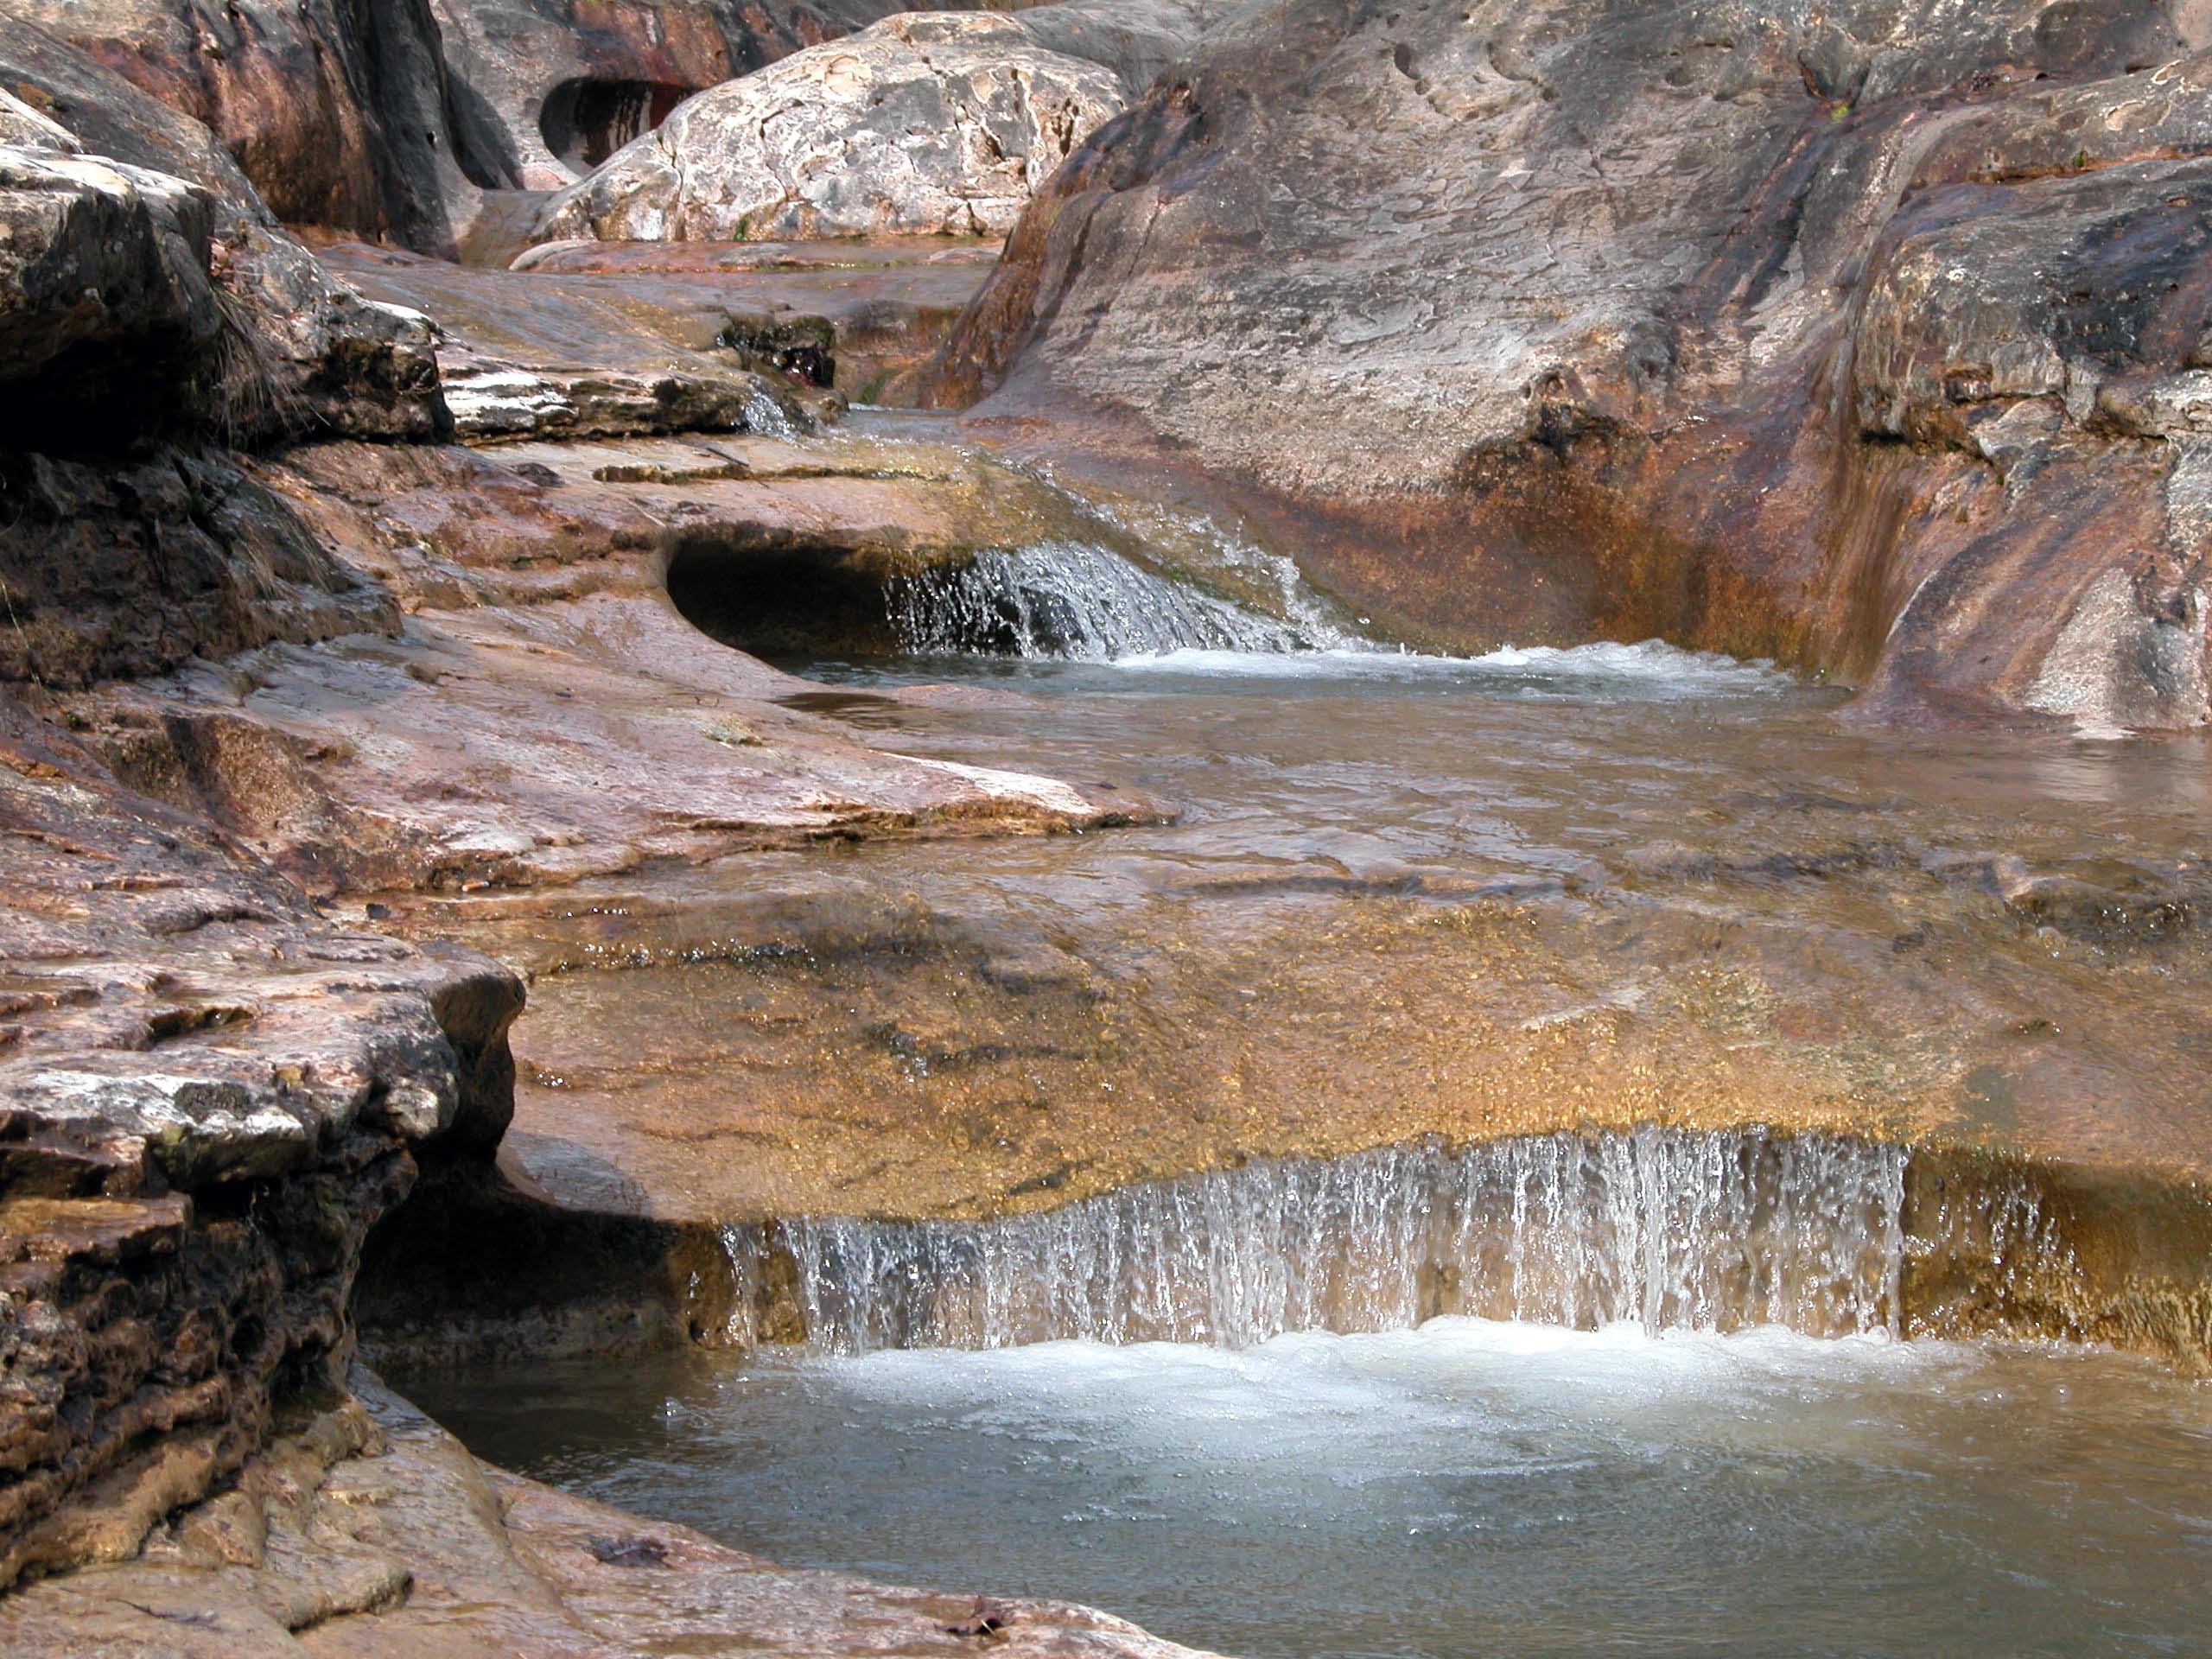 Water flowing over rock formation on the preserve.